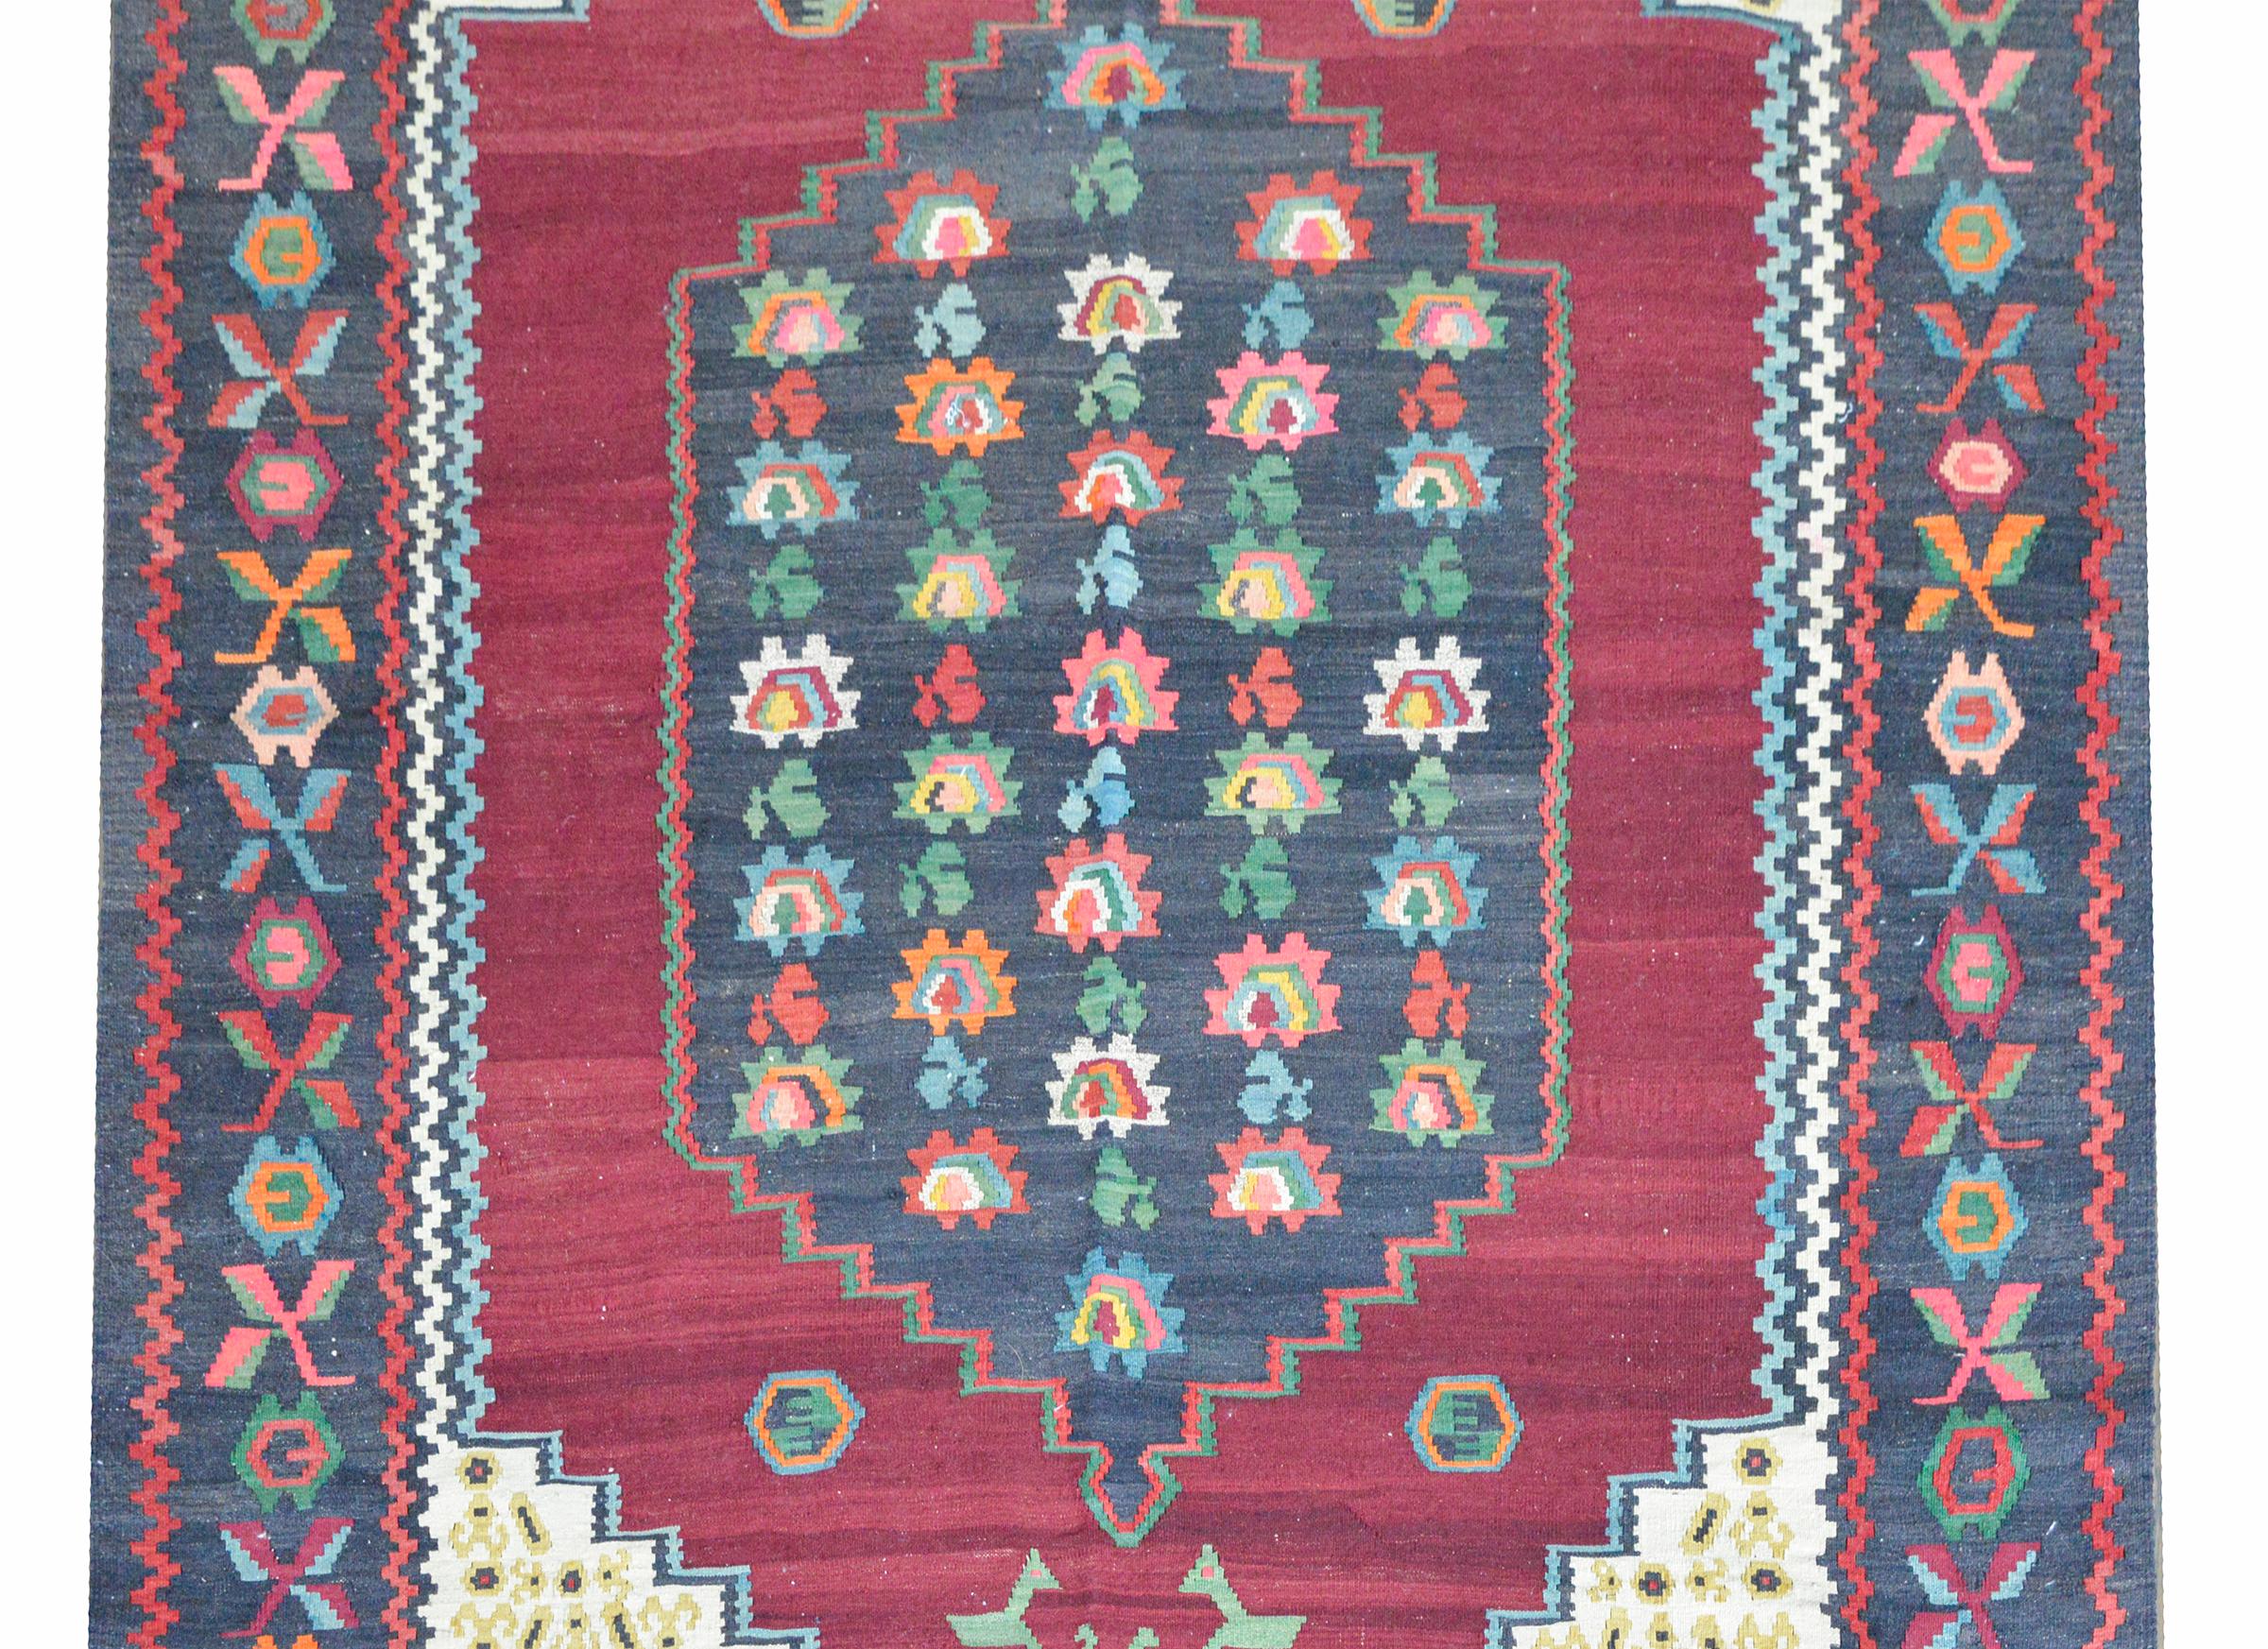 A wonderful vintage Armenian kilim rug with a central medallion with stylized flowers woven in myriad colors against a dark crimson background, and floating amidst a field of more stylized flowers, and surrounded by a wide border with more flowers.